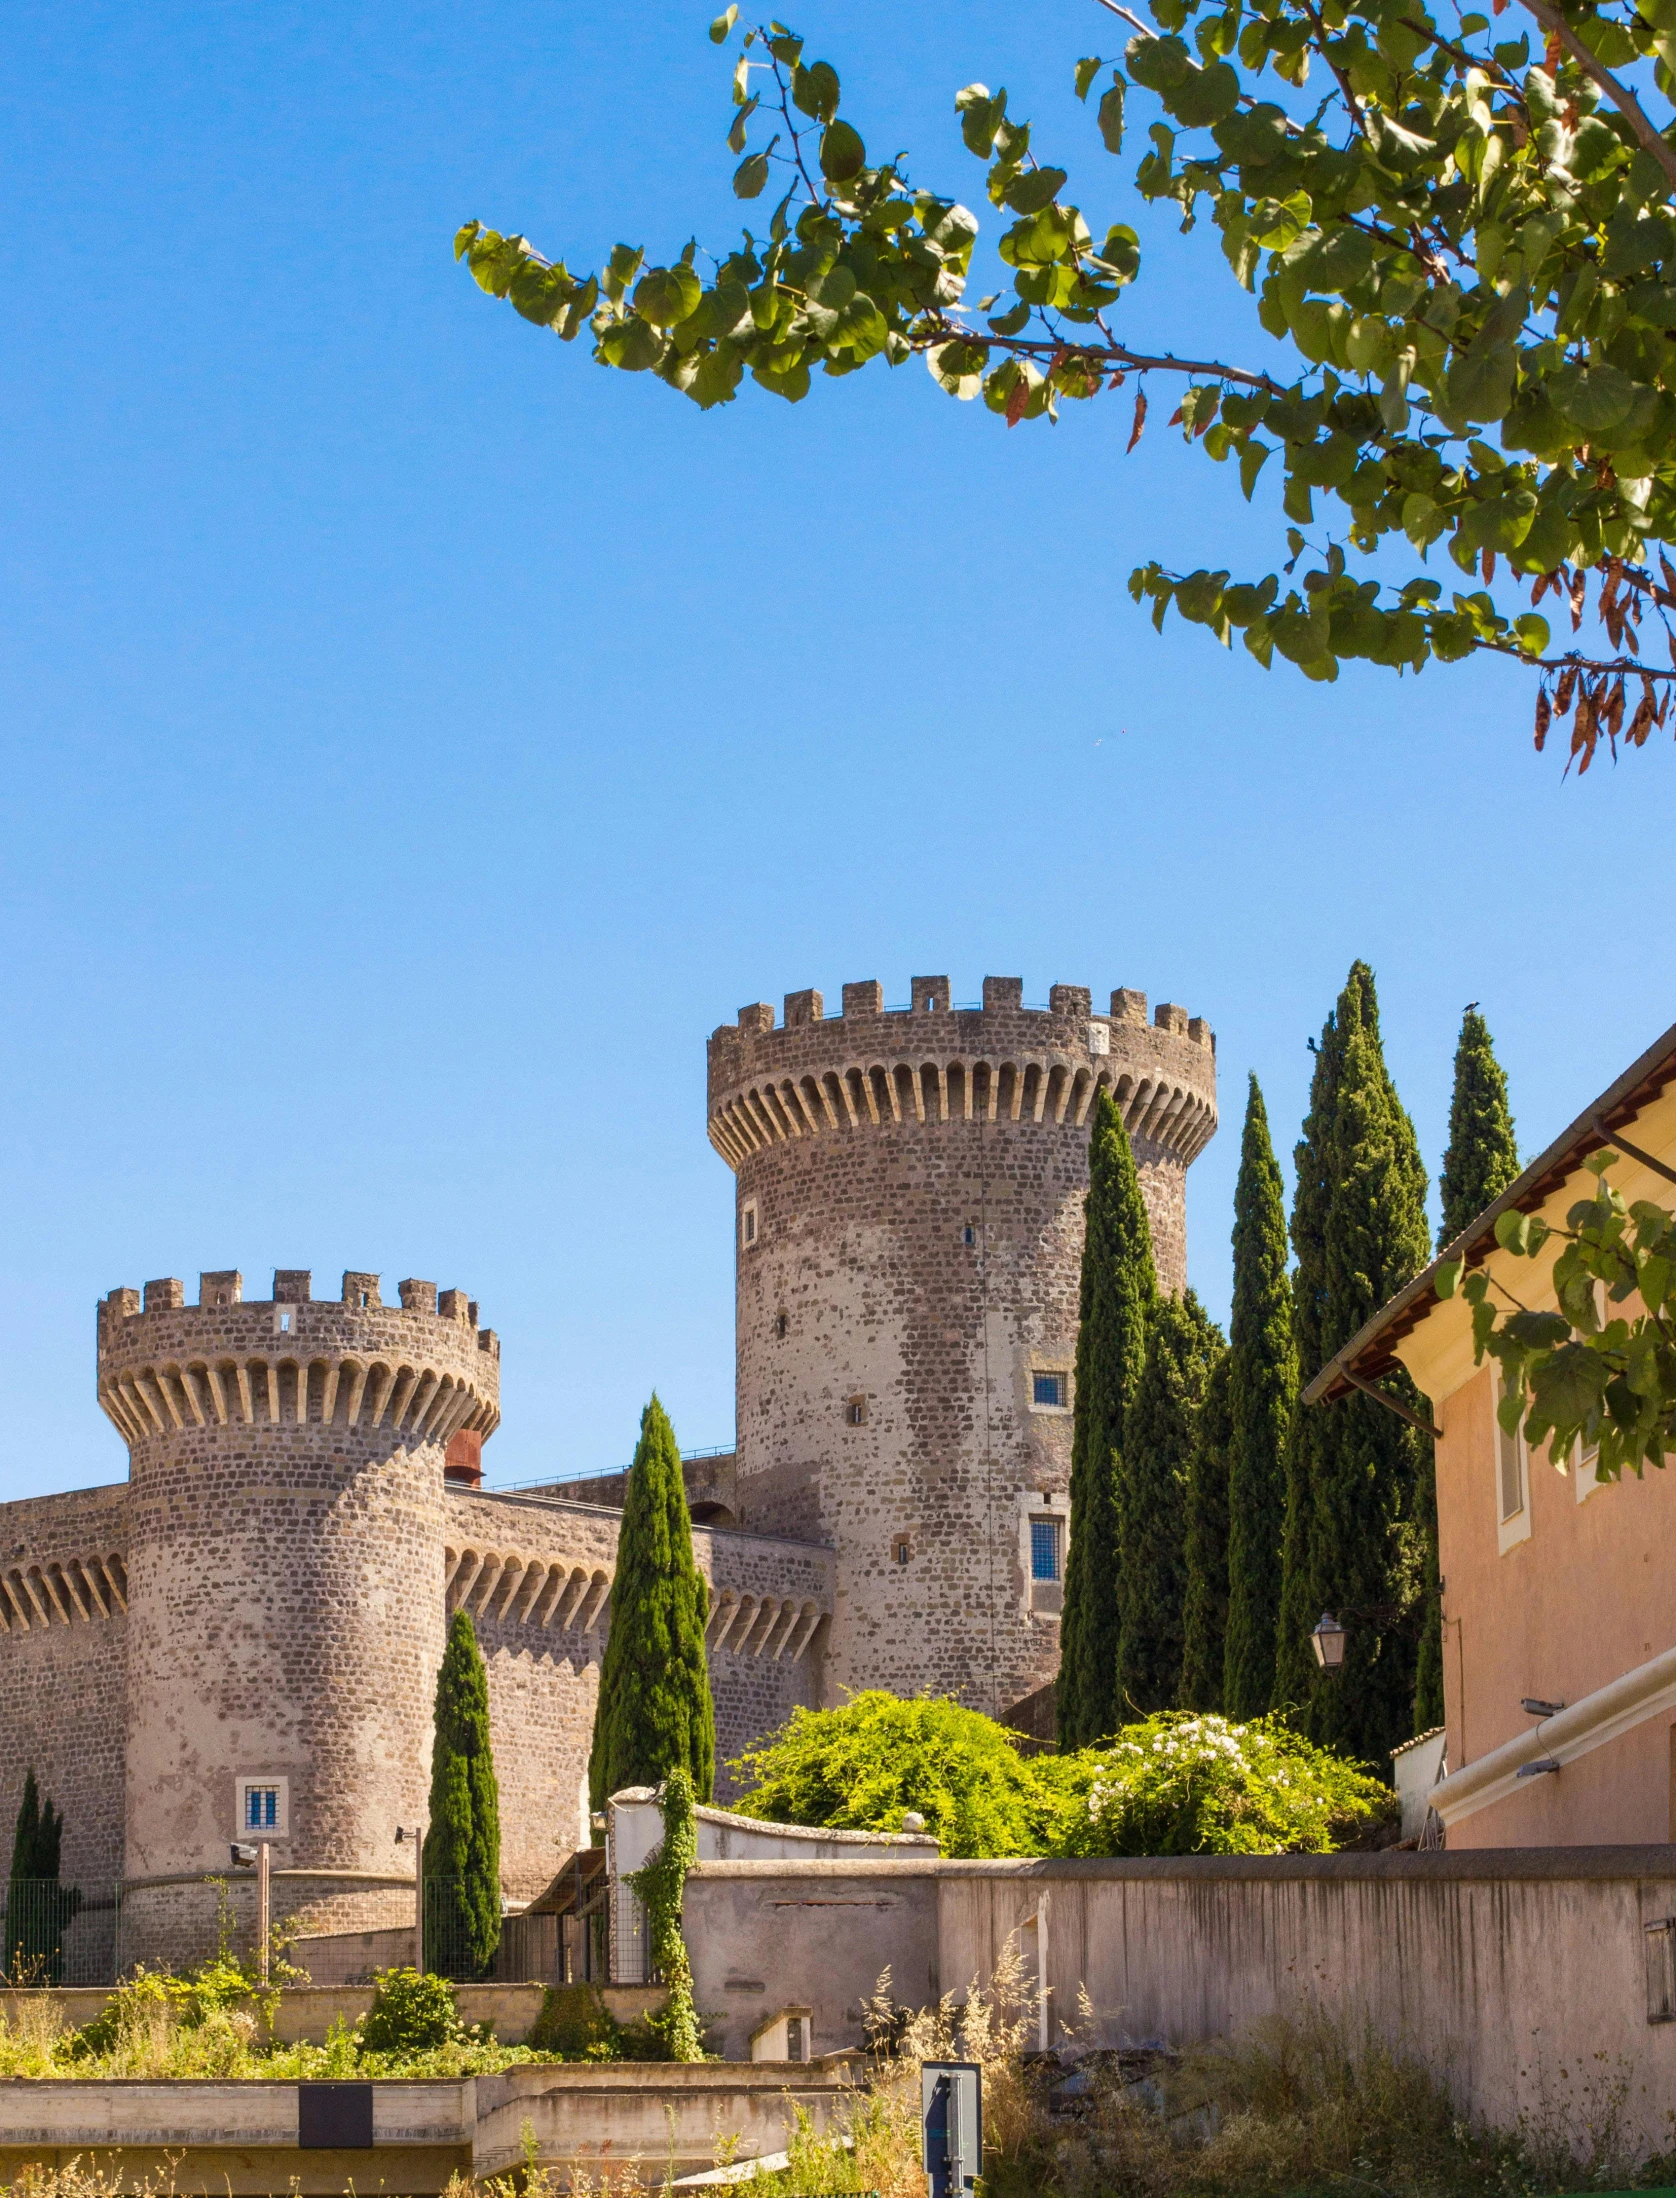 a large castle sitting on top of a lush green field, inspired by Serafino De Tivoli, city walls, cypresses, award - winning, baroque winding cobbled streets